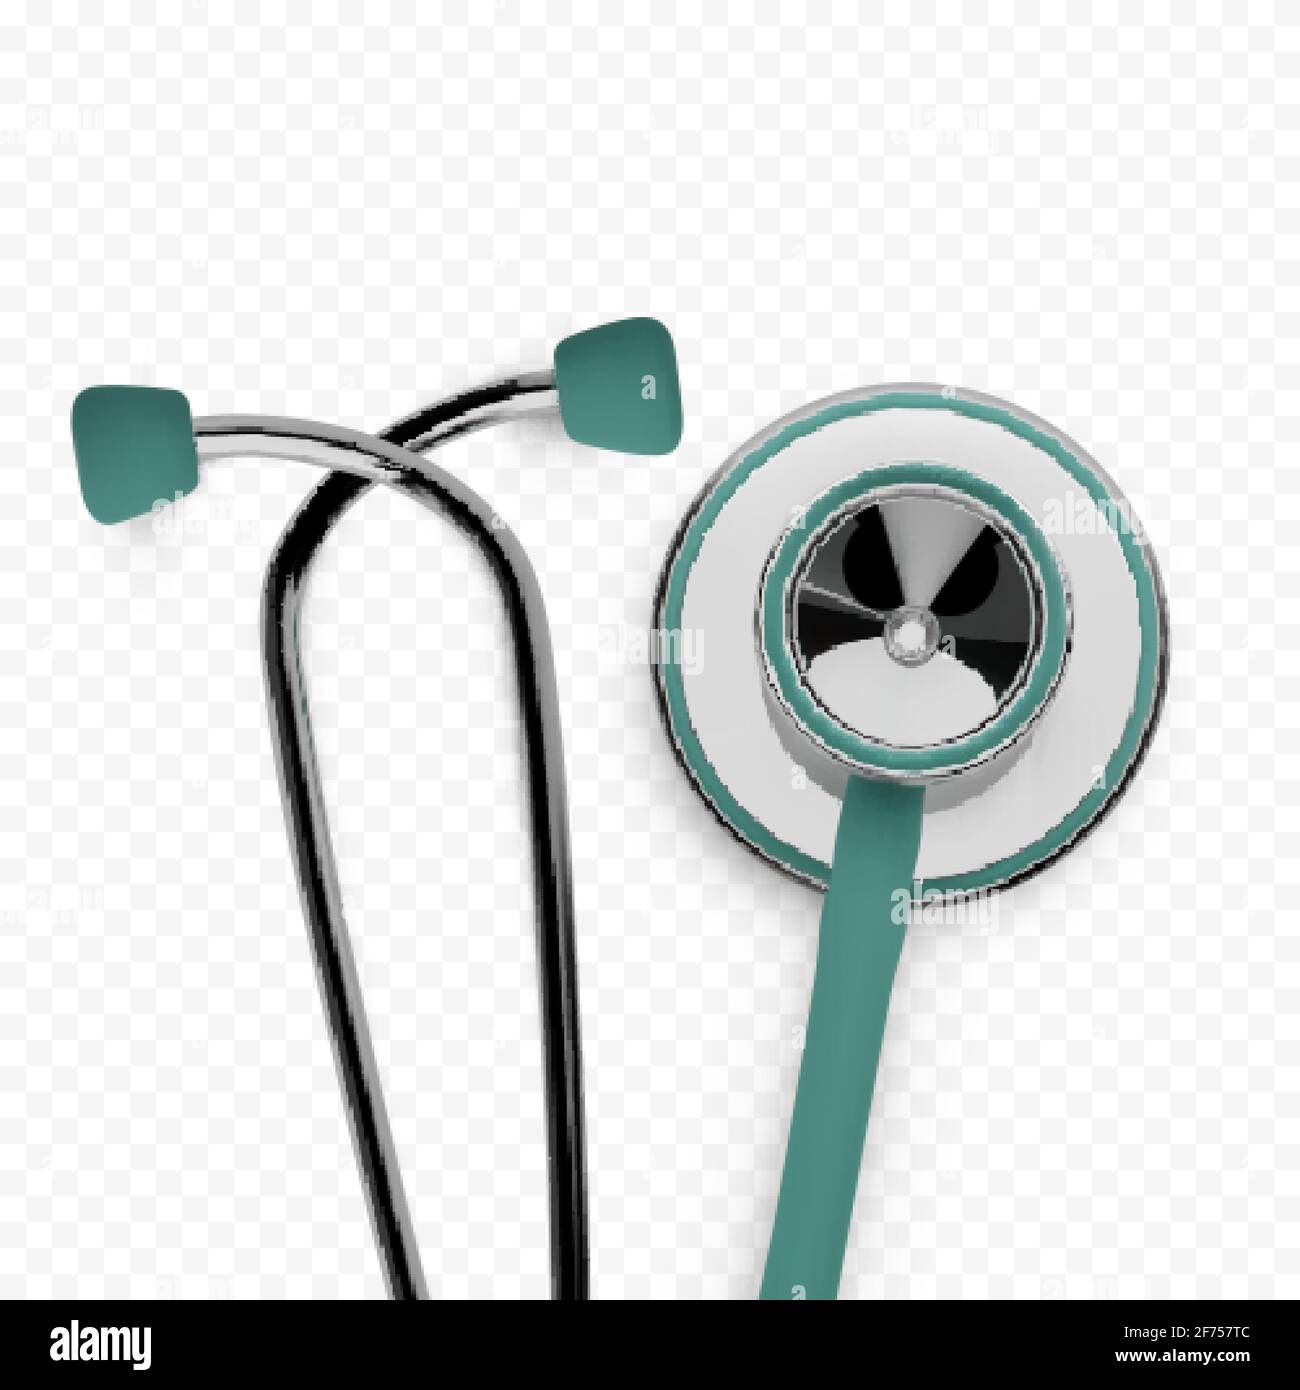 Stothoscope 3d render. Medical equipment. Health care banner concept. Diagnostics of heart and lung health. Vector Stock Vector